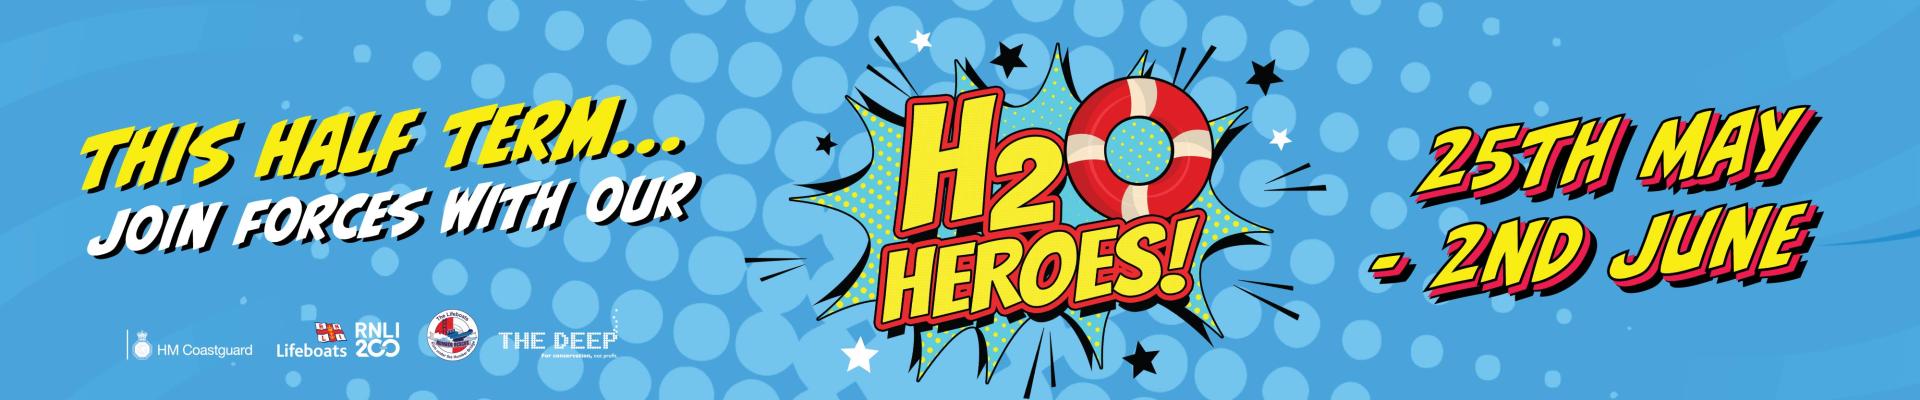 H20 Heroes event banner